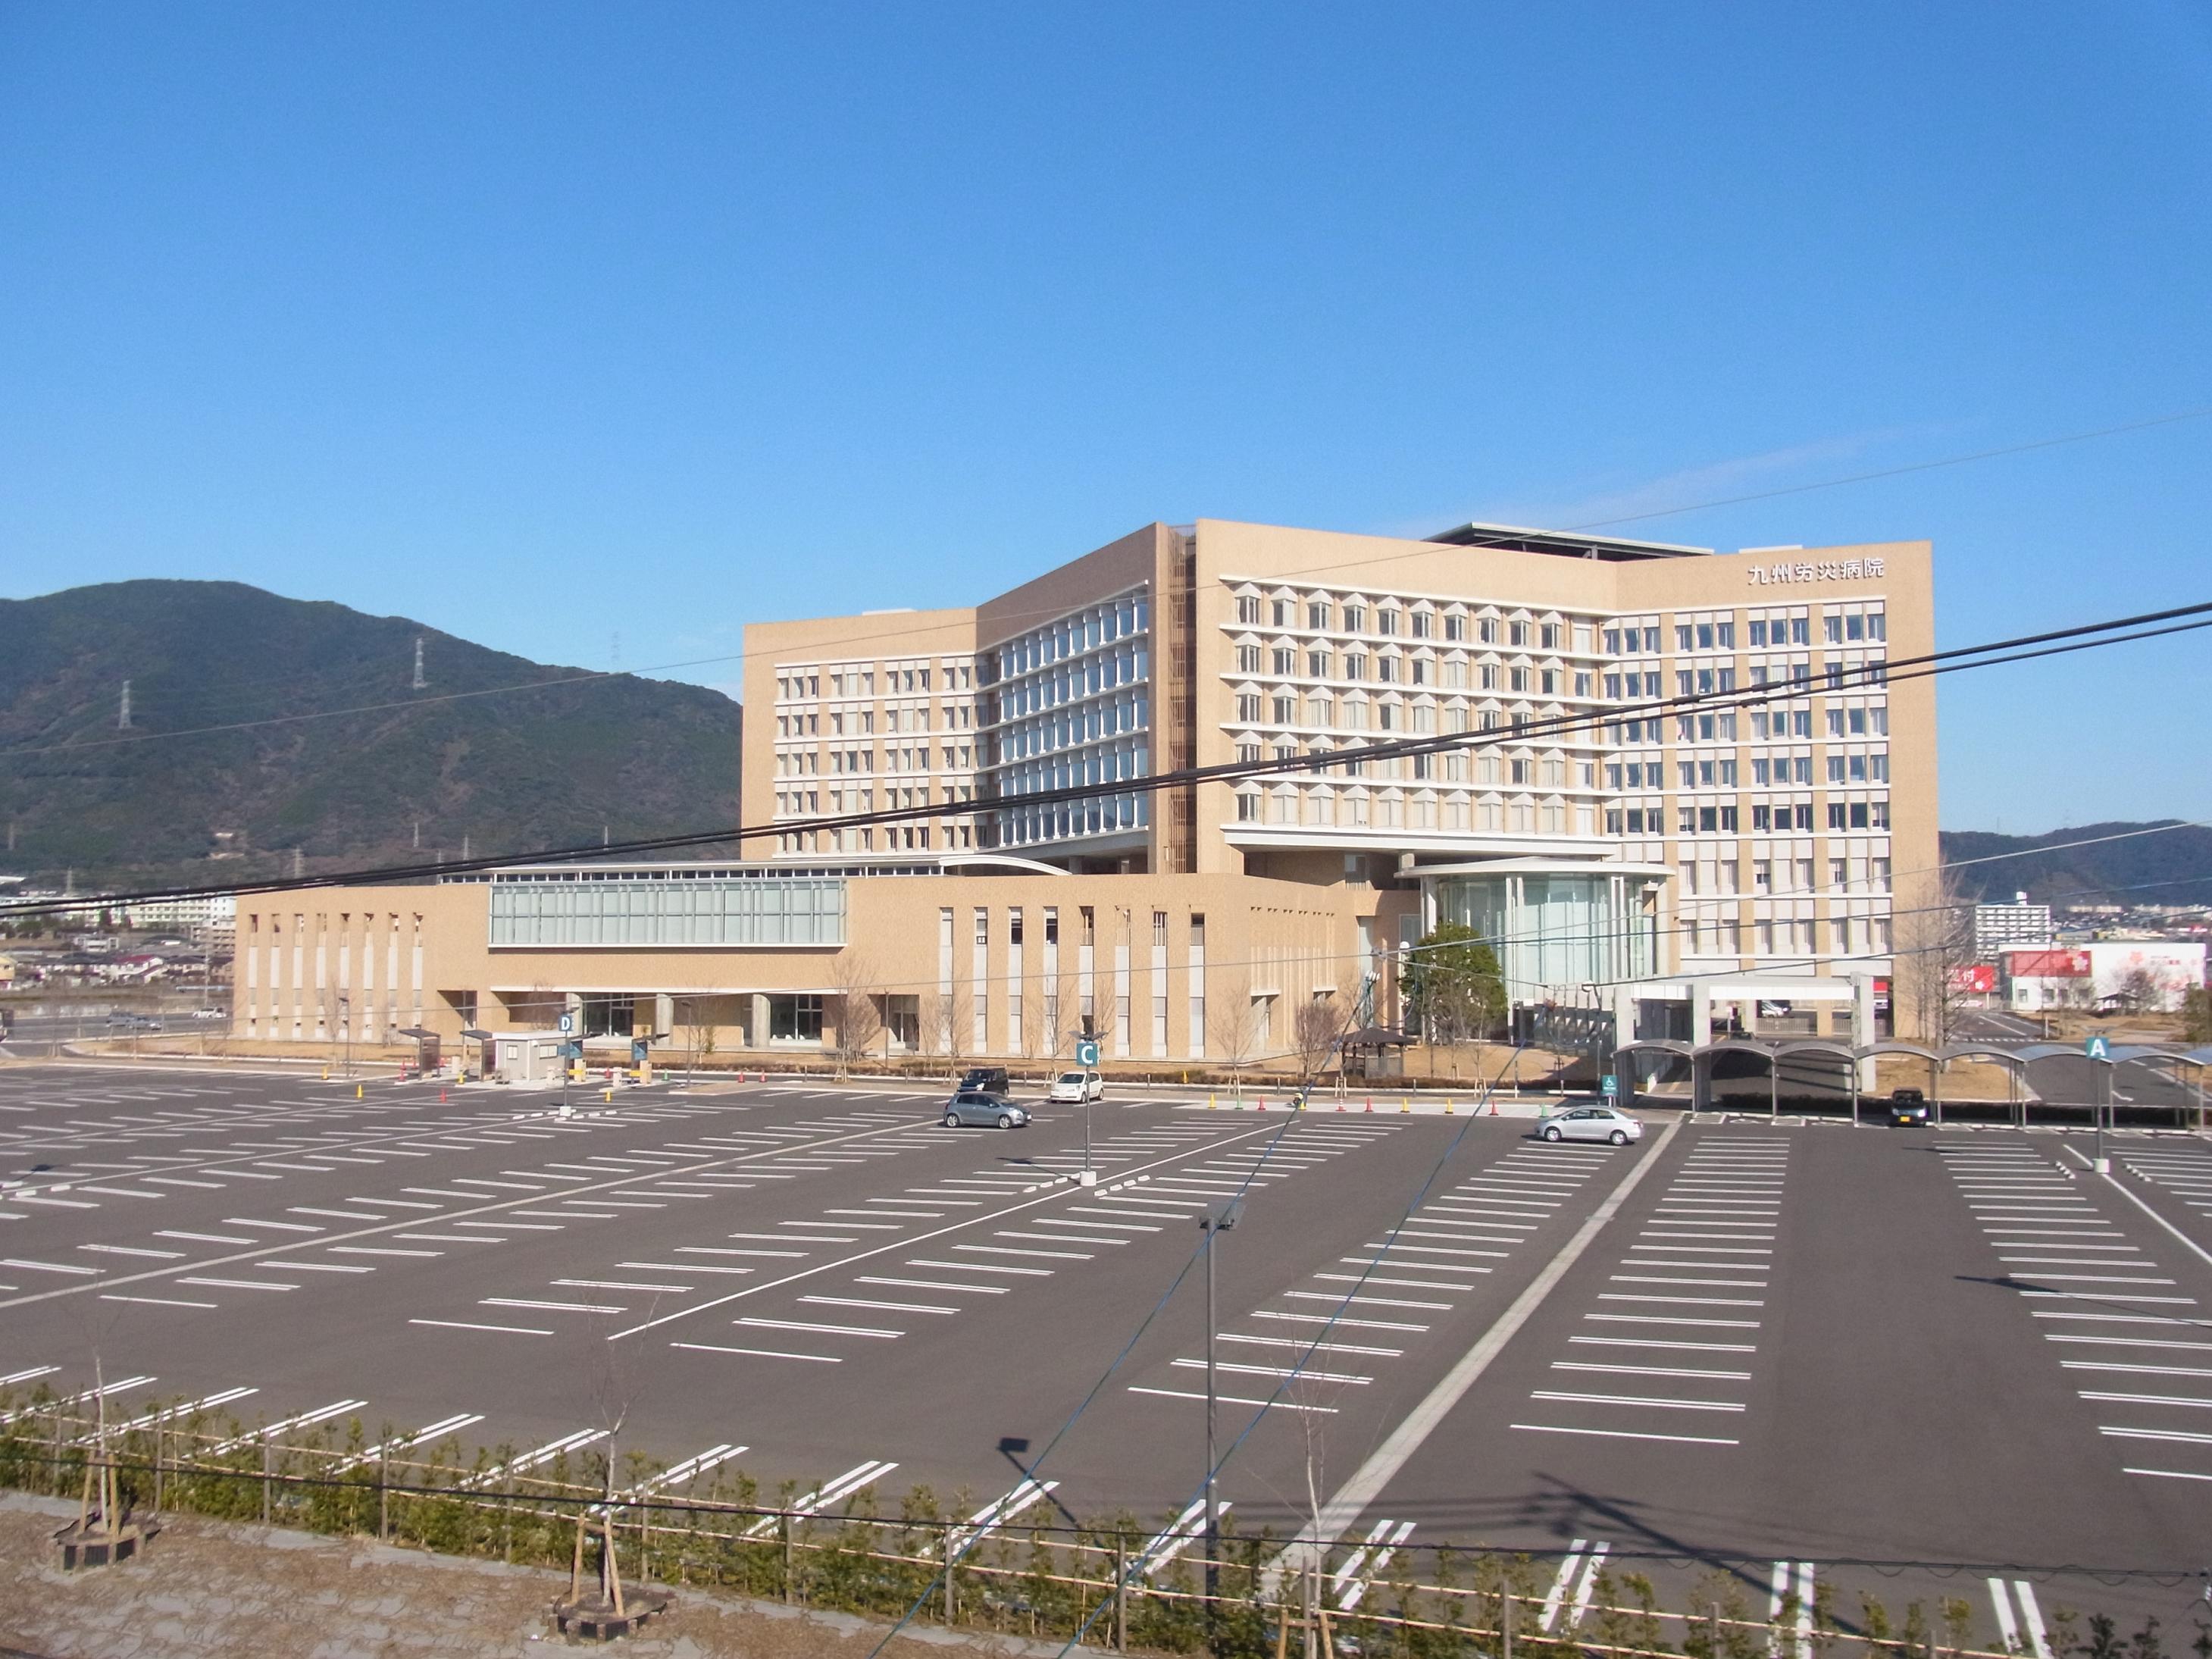 Hospital. 1792m to the National Institute of Labor Health and Welfare Organization Kyushurosaibyoin (hospital)